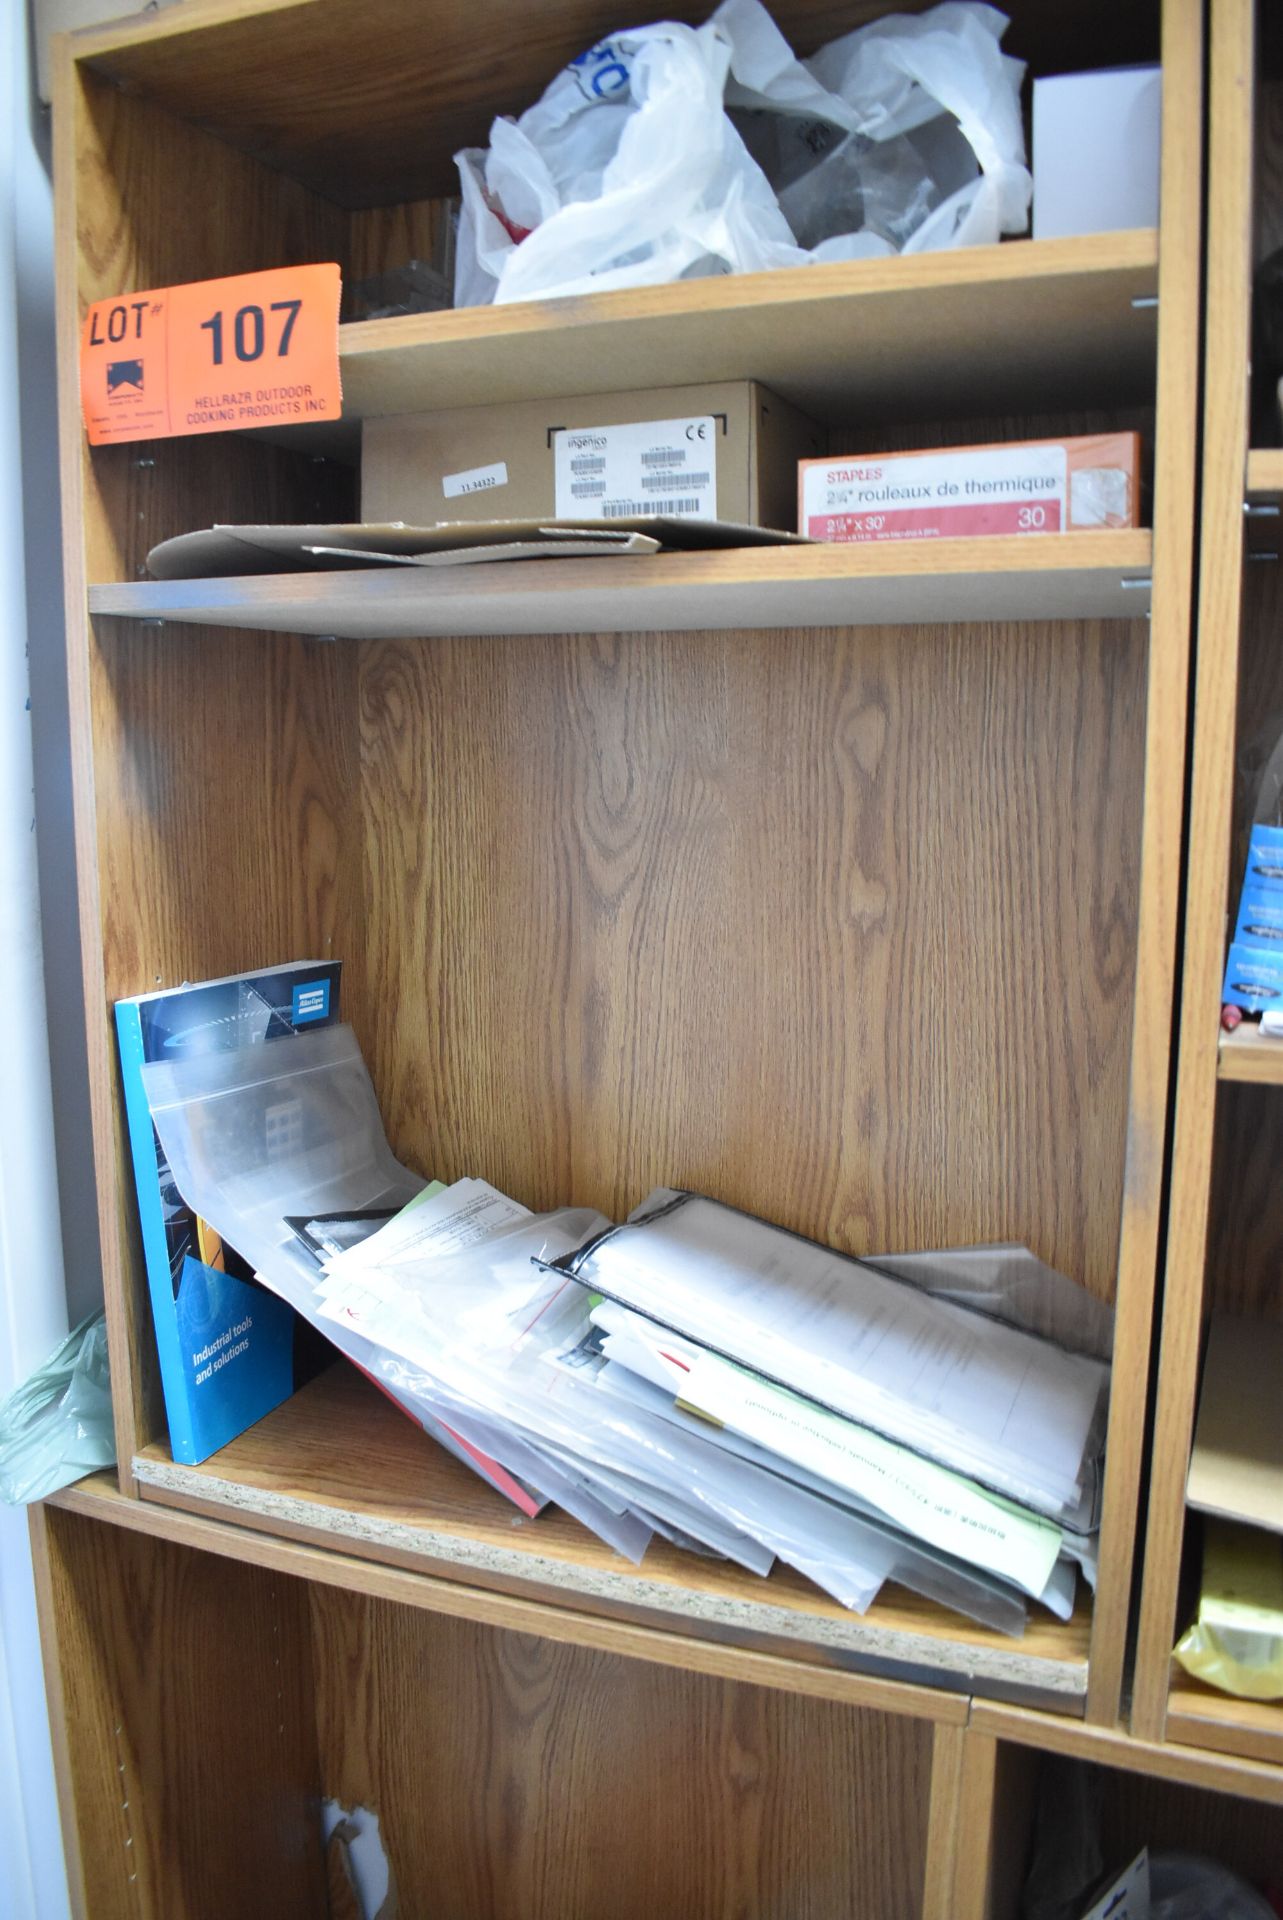 LOT/ CONTENTS OF SUPPLY CLOSET - INCLUIDNG OFFICE SUPPLIES, CLEANING SUPPLIES, SHELVES - Image 2 of 6